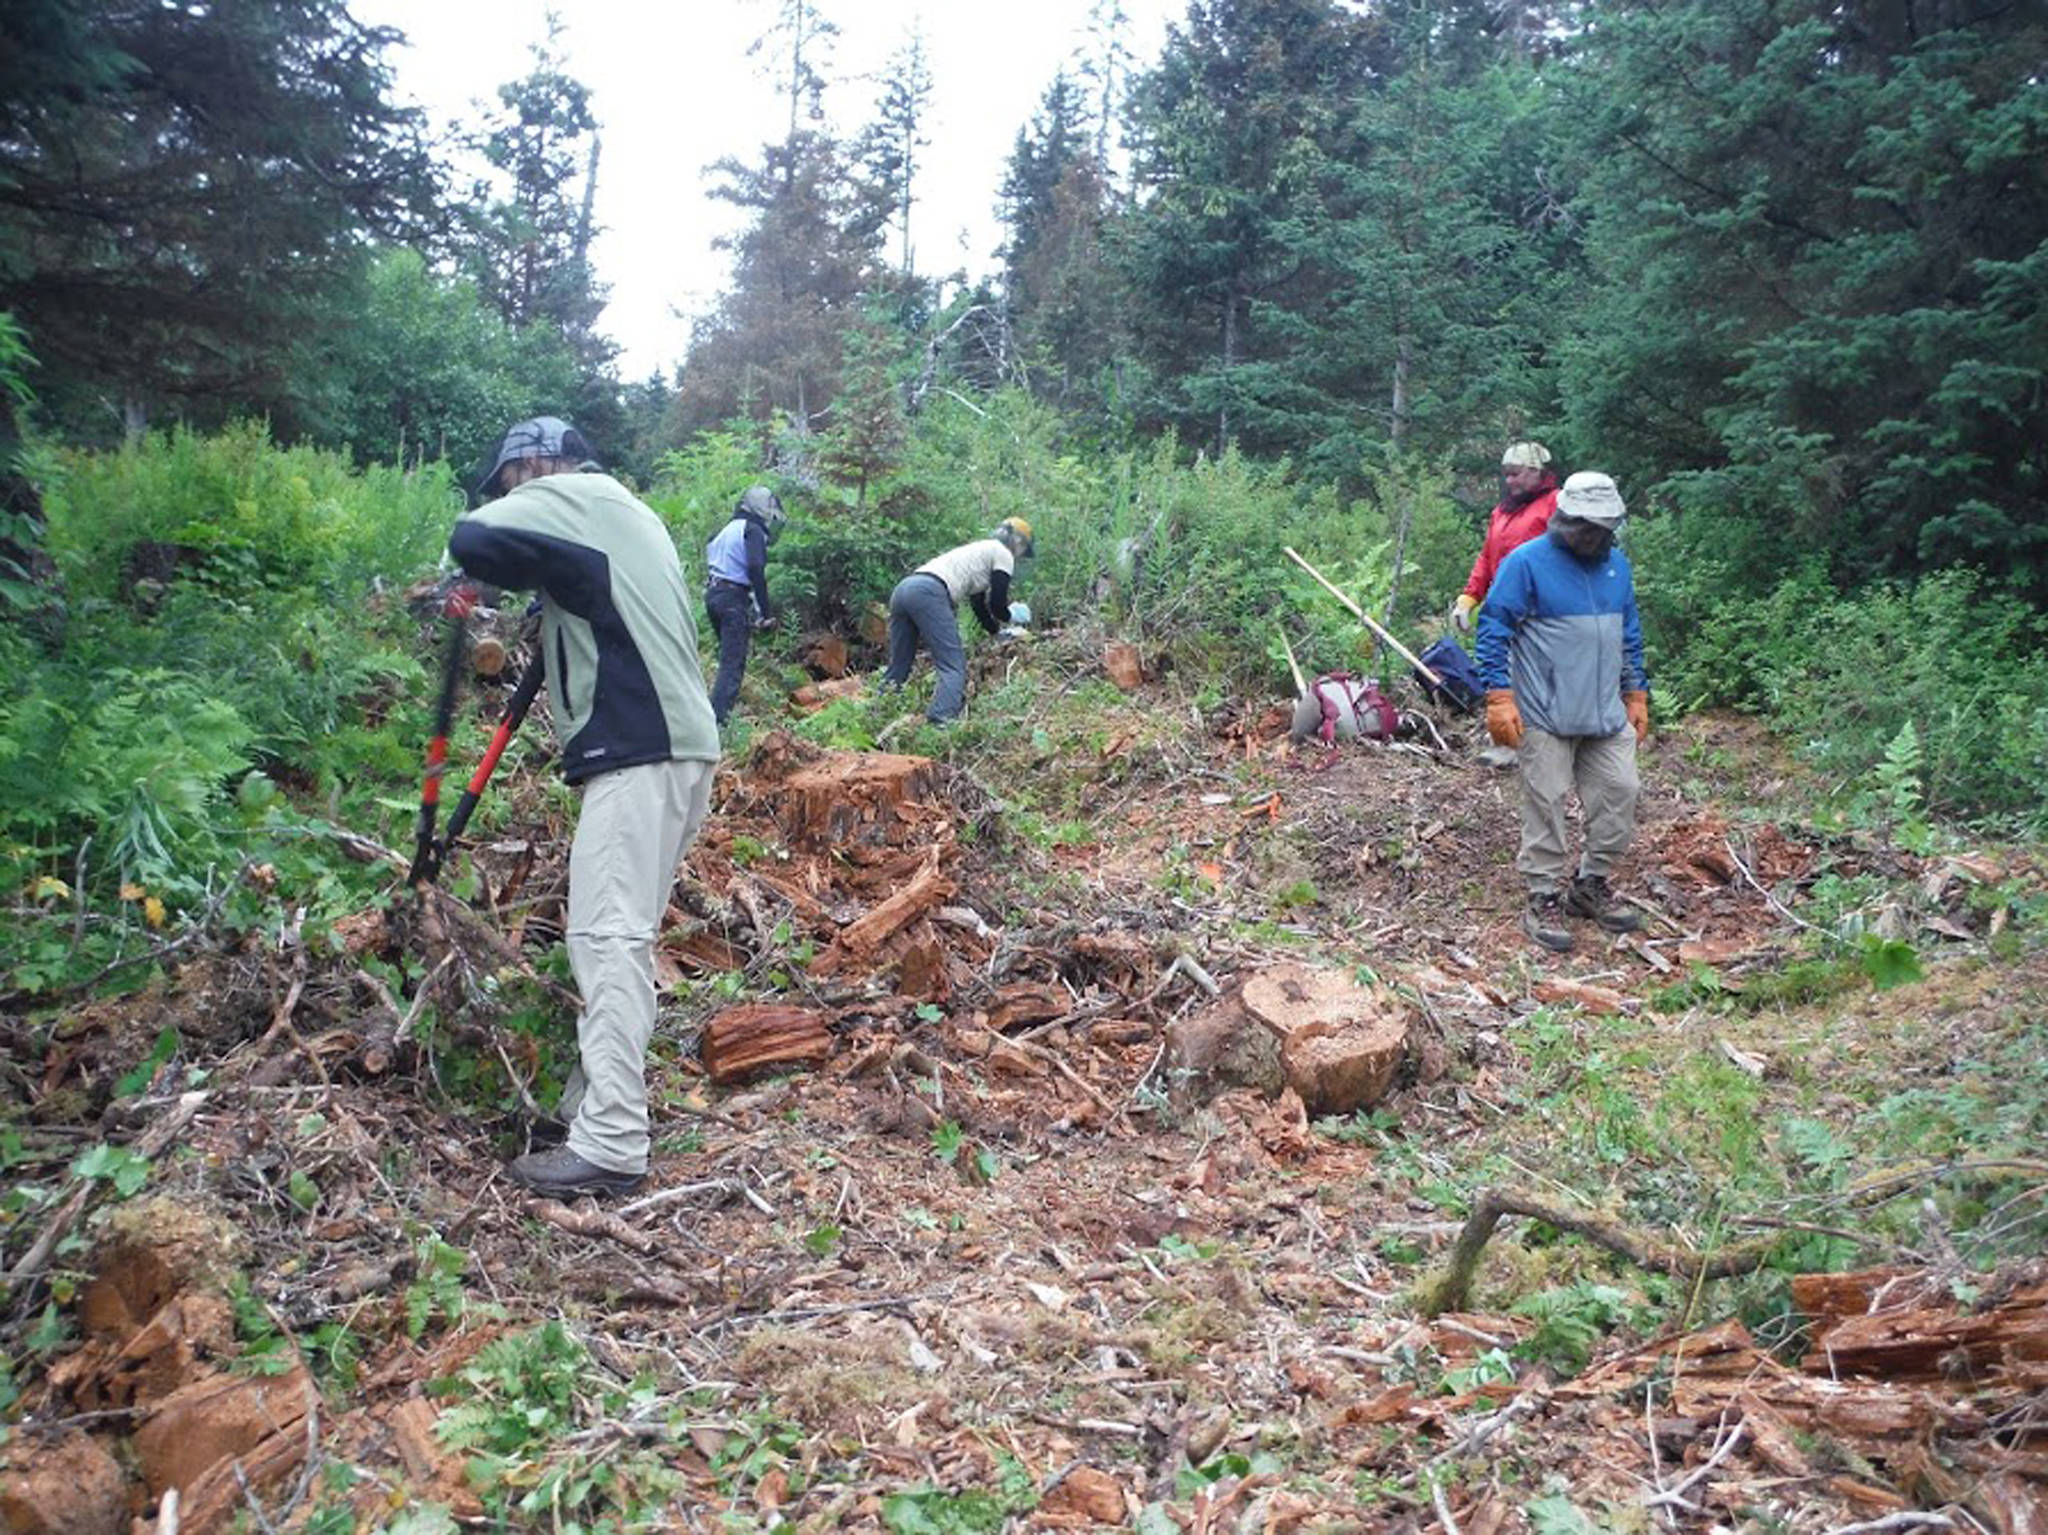 Volunteers clear vegetation in Kachemak Bay State Park in summer 2016. This year, volunteers will have the opportunity to cross the bay and volunteer to clear trails on Saturday, June 3, as part of National Trails Day, or can volunteer for work parties on every Saturday throughout the summer through the Alaska Division of Parks and Outdoor Recreation. (Courtesy Christina Whiting/Alaska Division of Parks and Outdoor Recreation)